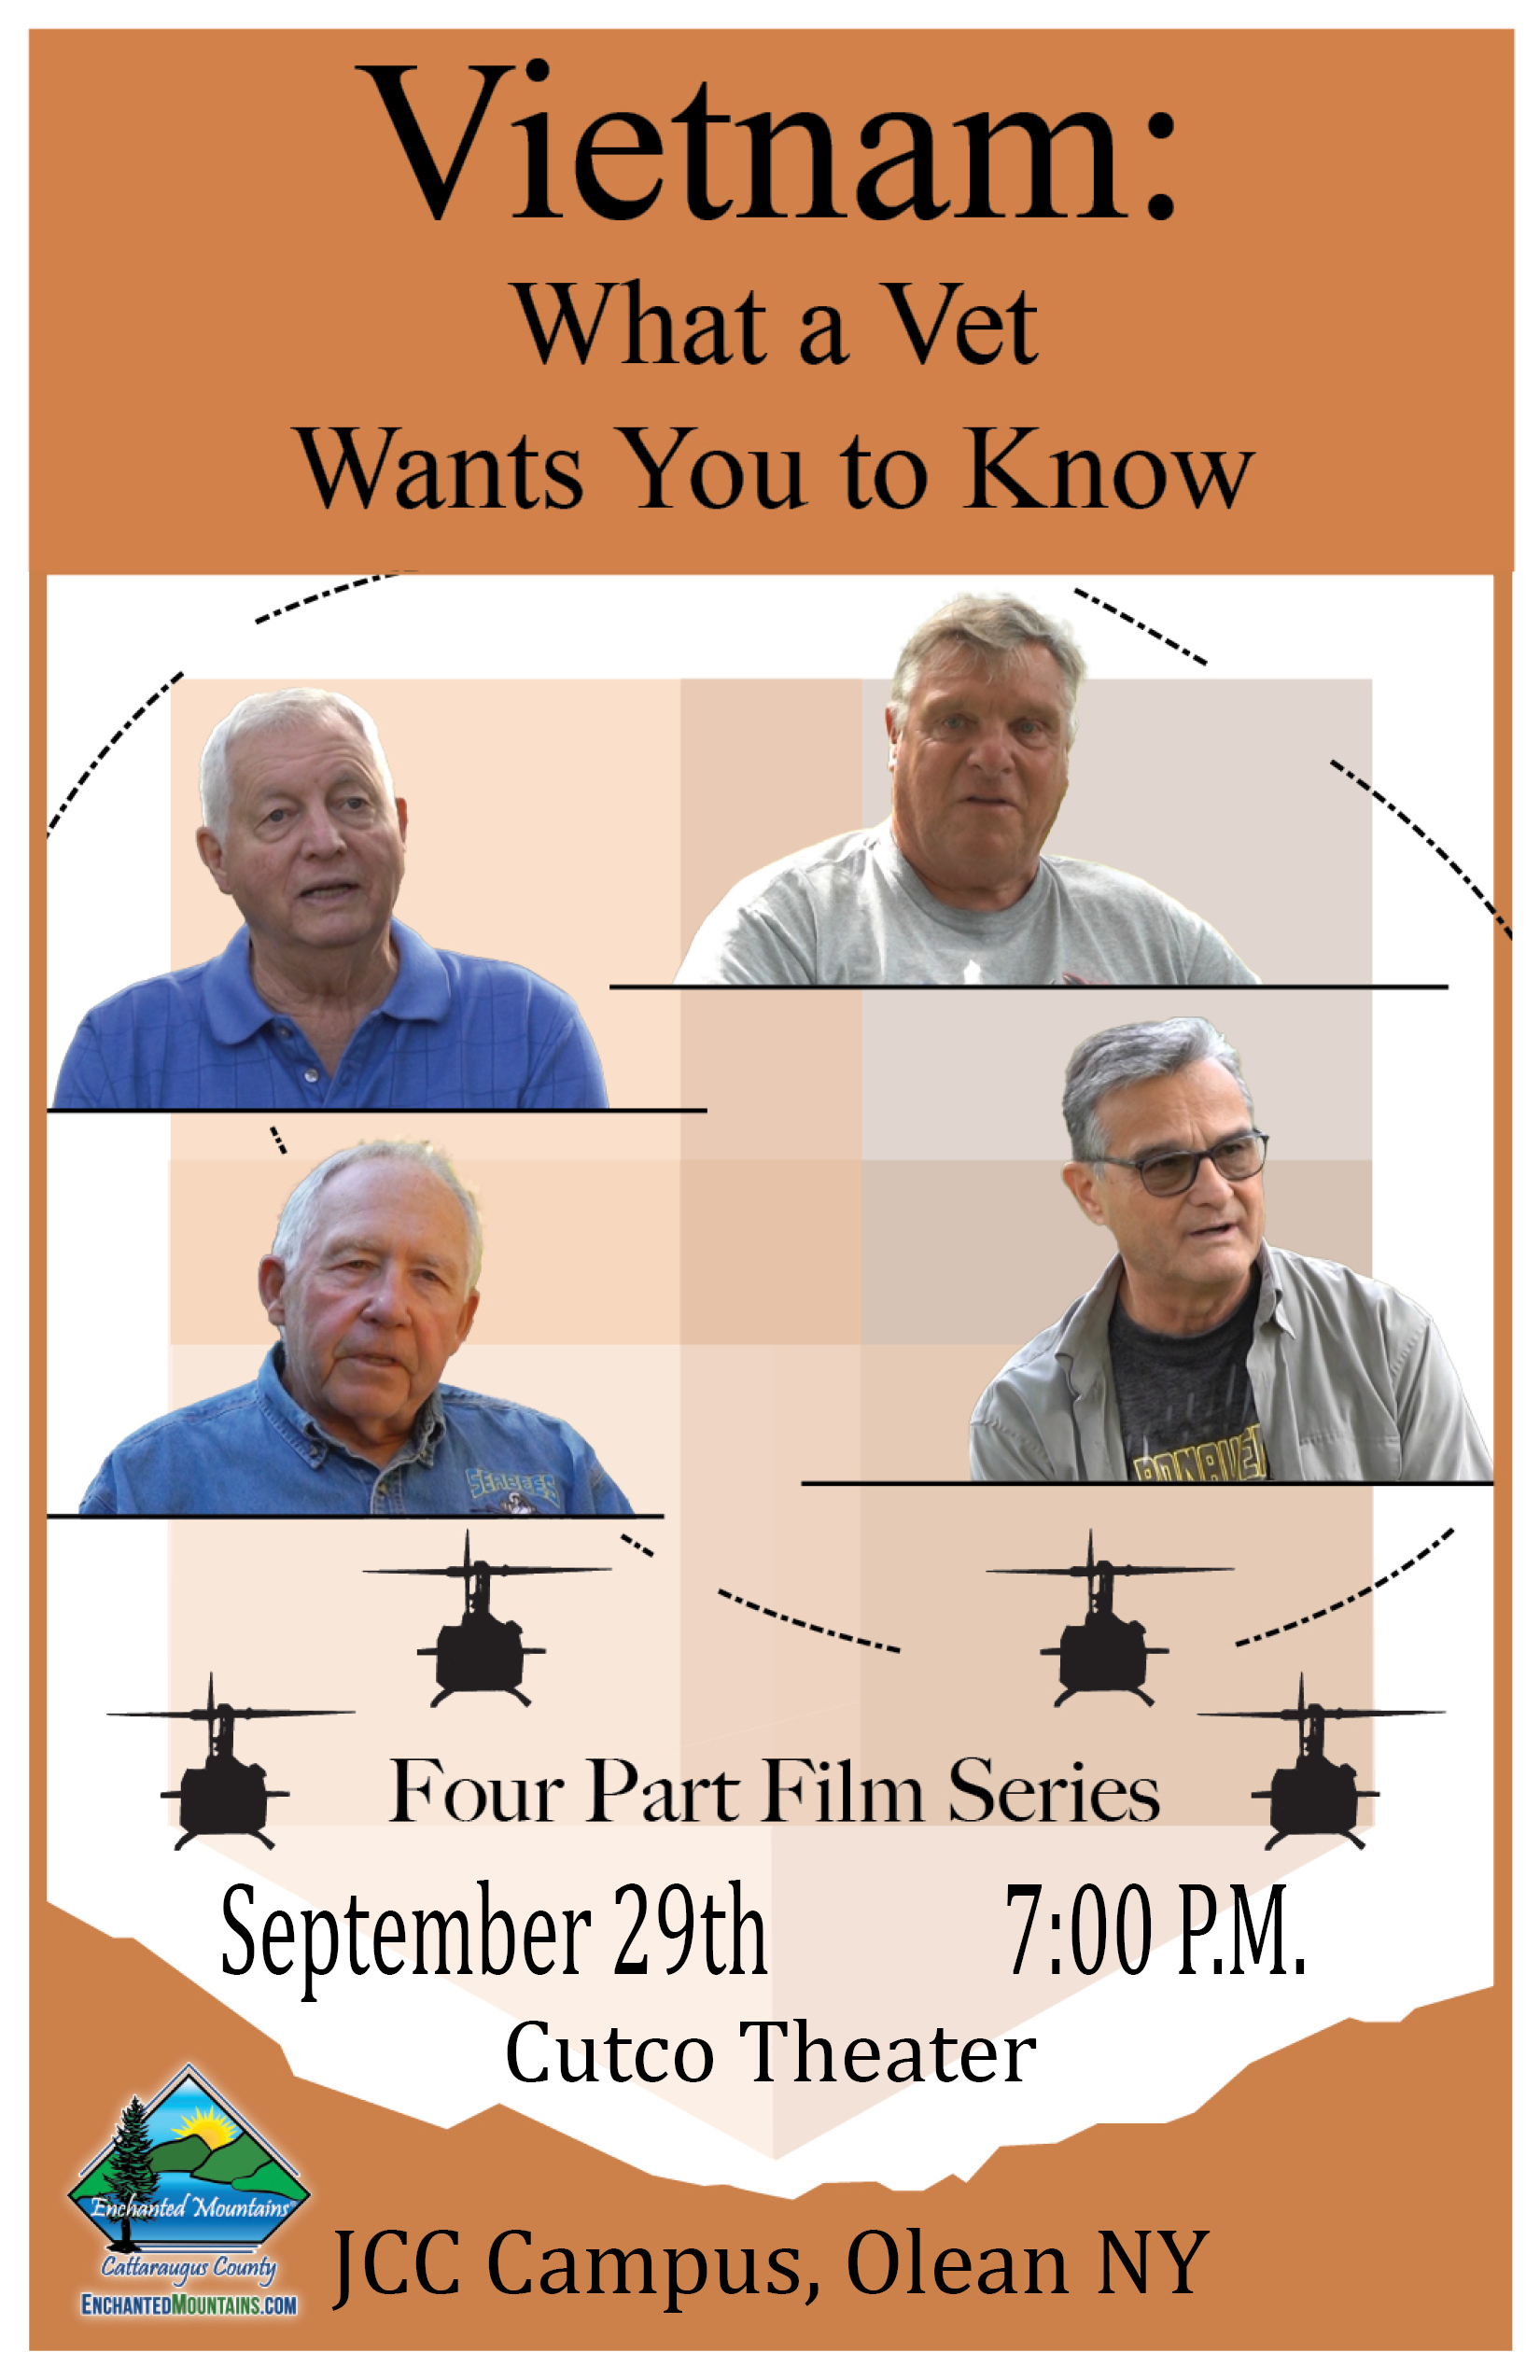 Poster for "Vietnam: What a Vet wants you to know" event on September 29, 2022 at CutCo Theater